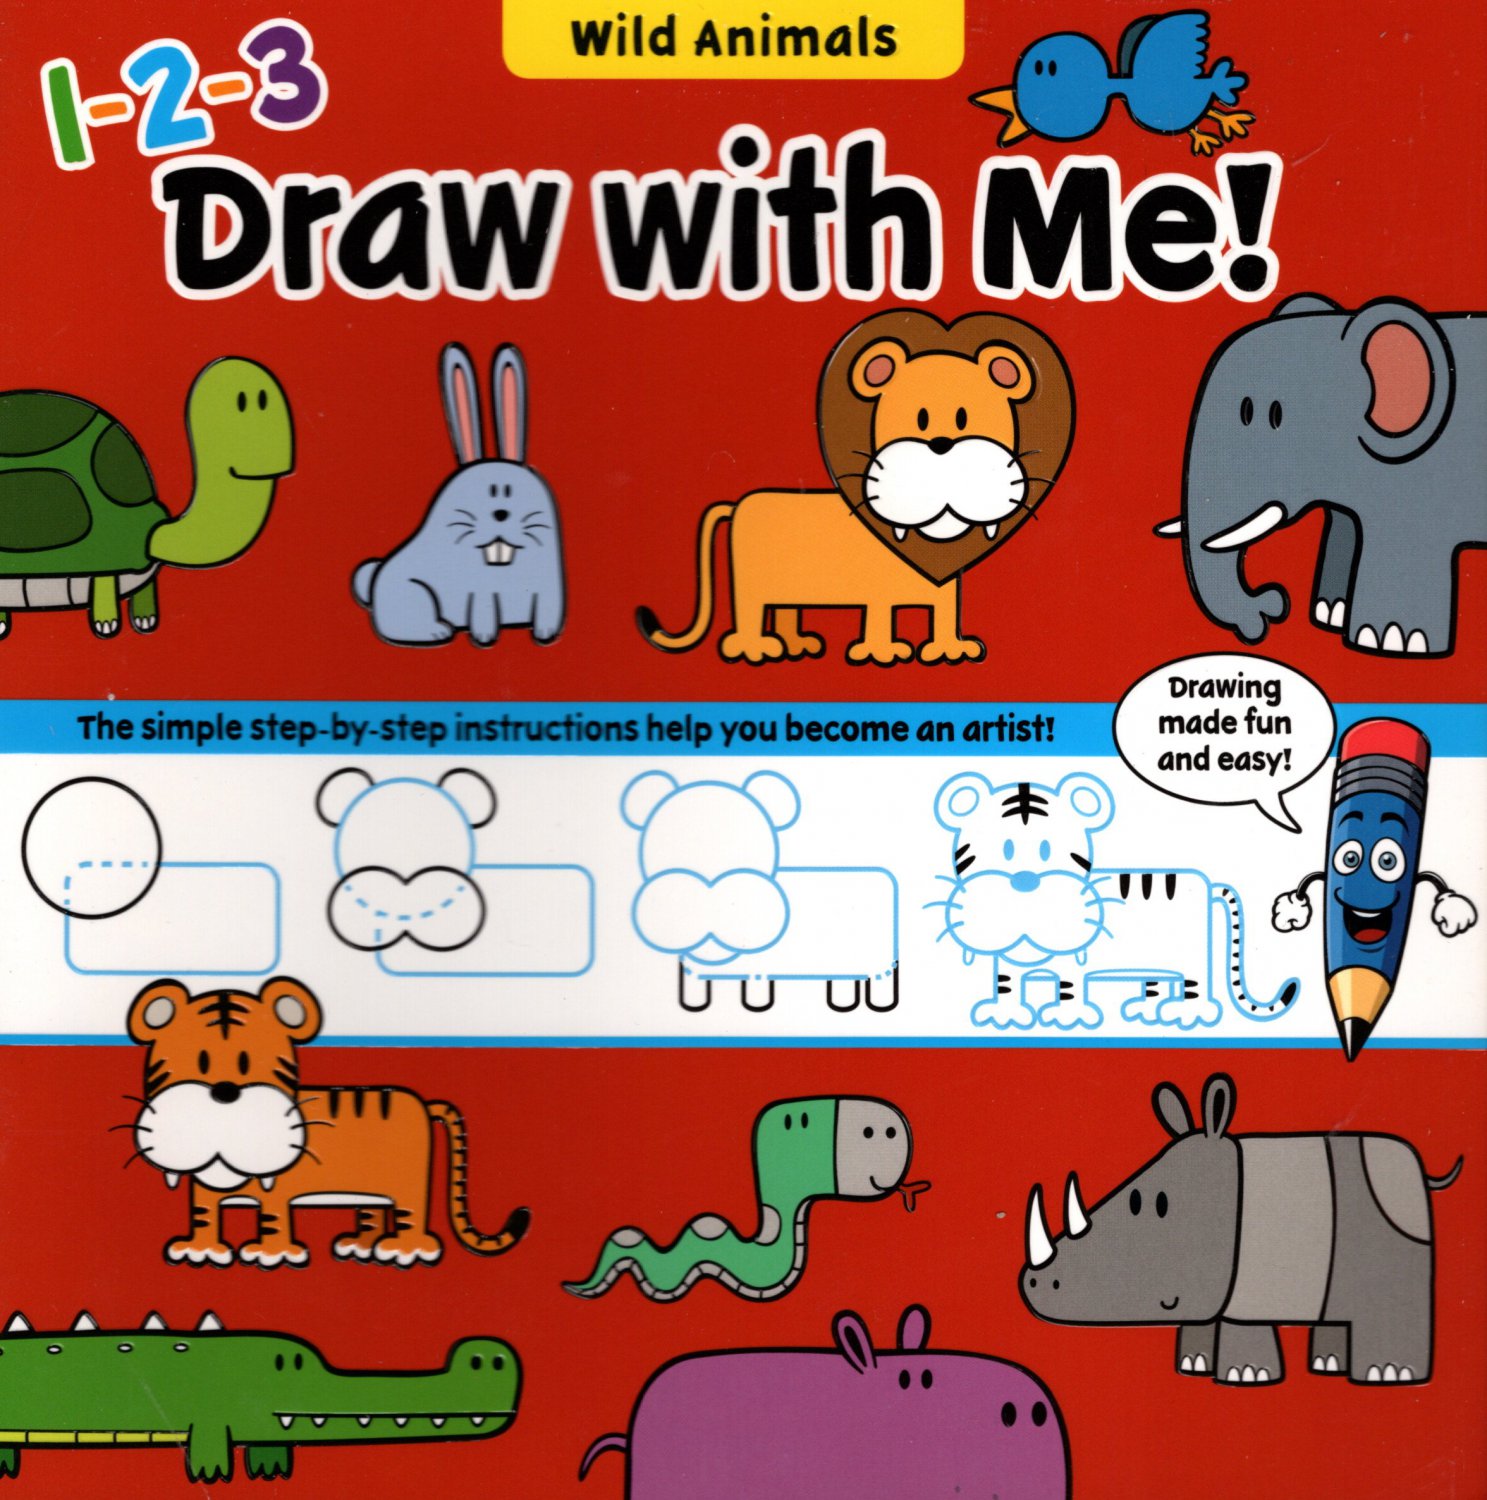 Flying Frog Wild Animals 123 Draw with Me!